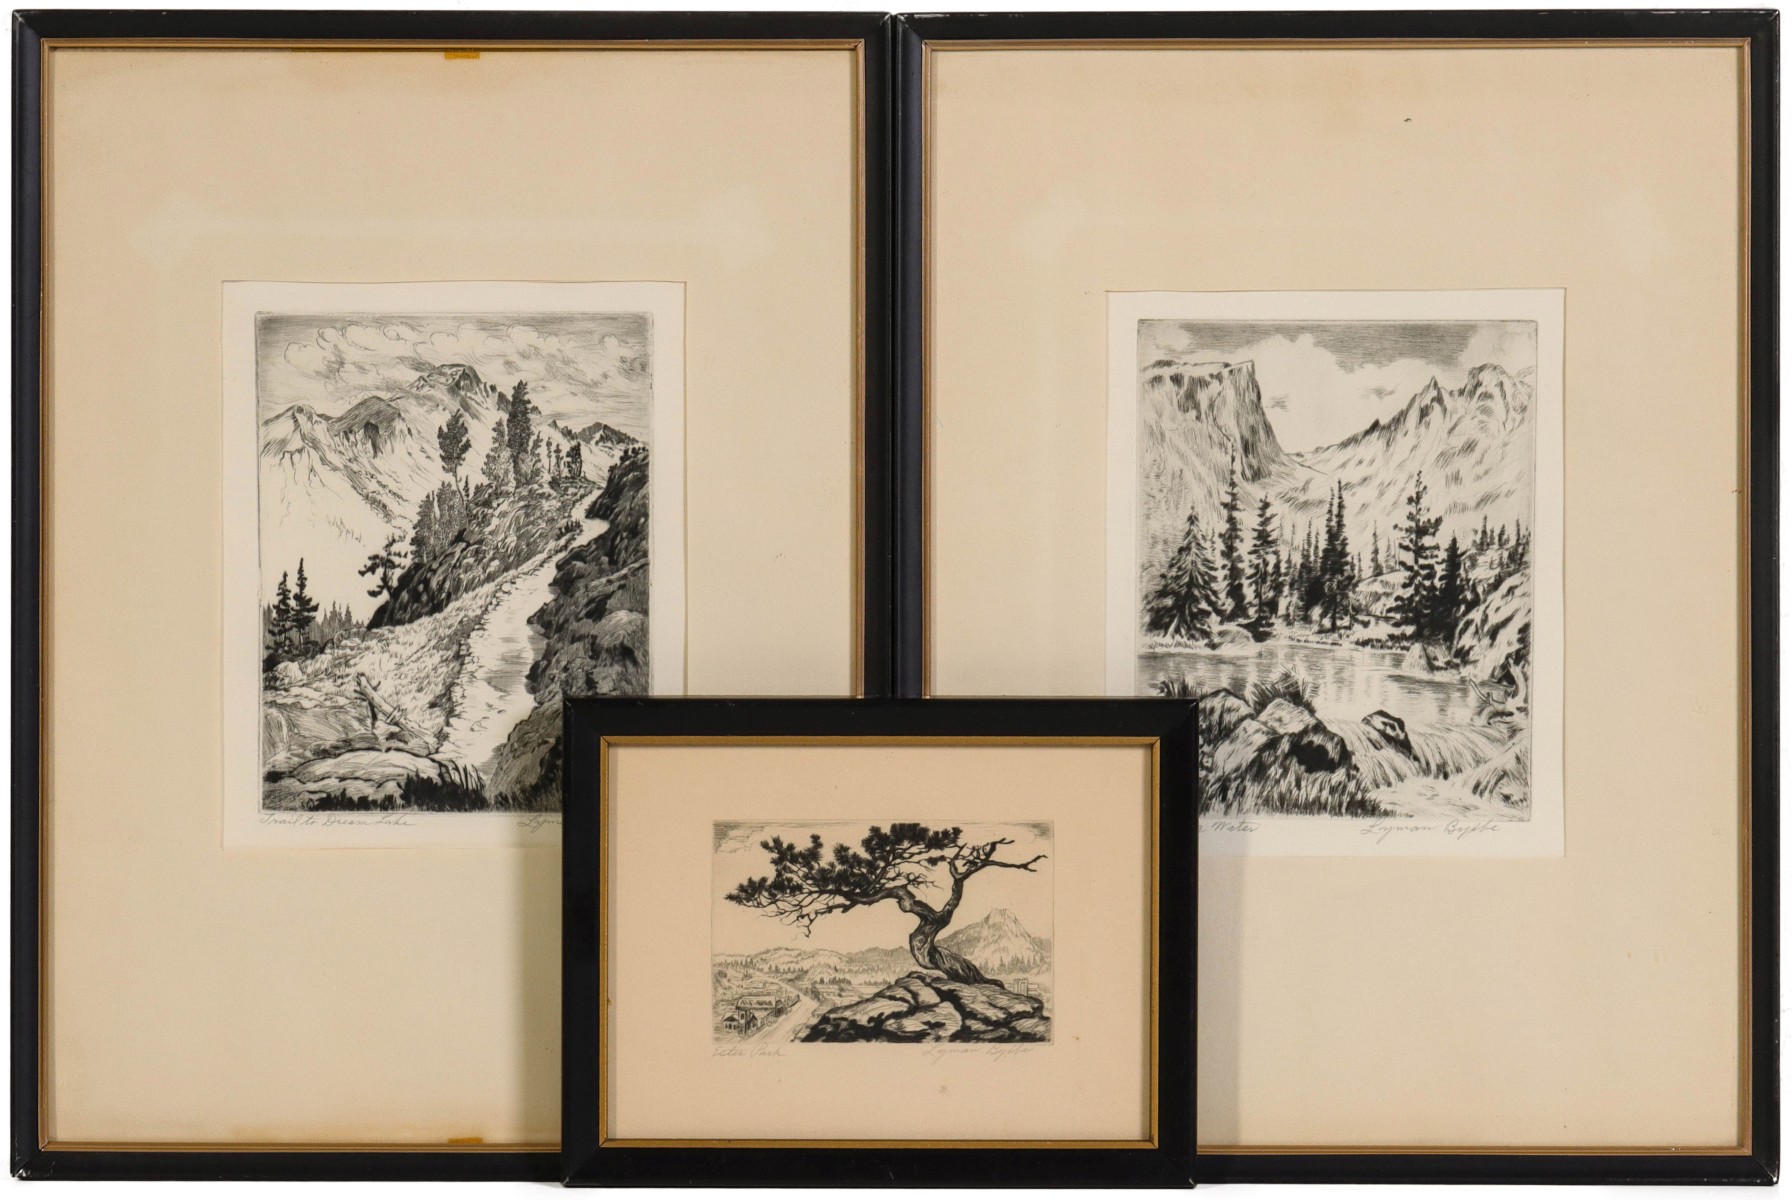 LYMAN BYXBE (1886-1980) PENCIL SIGND ETCHINGS (3 WORKS)